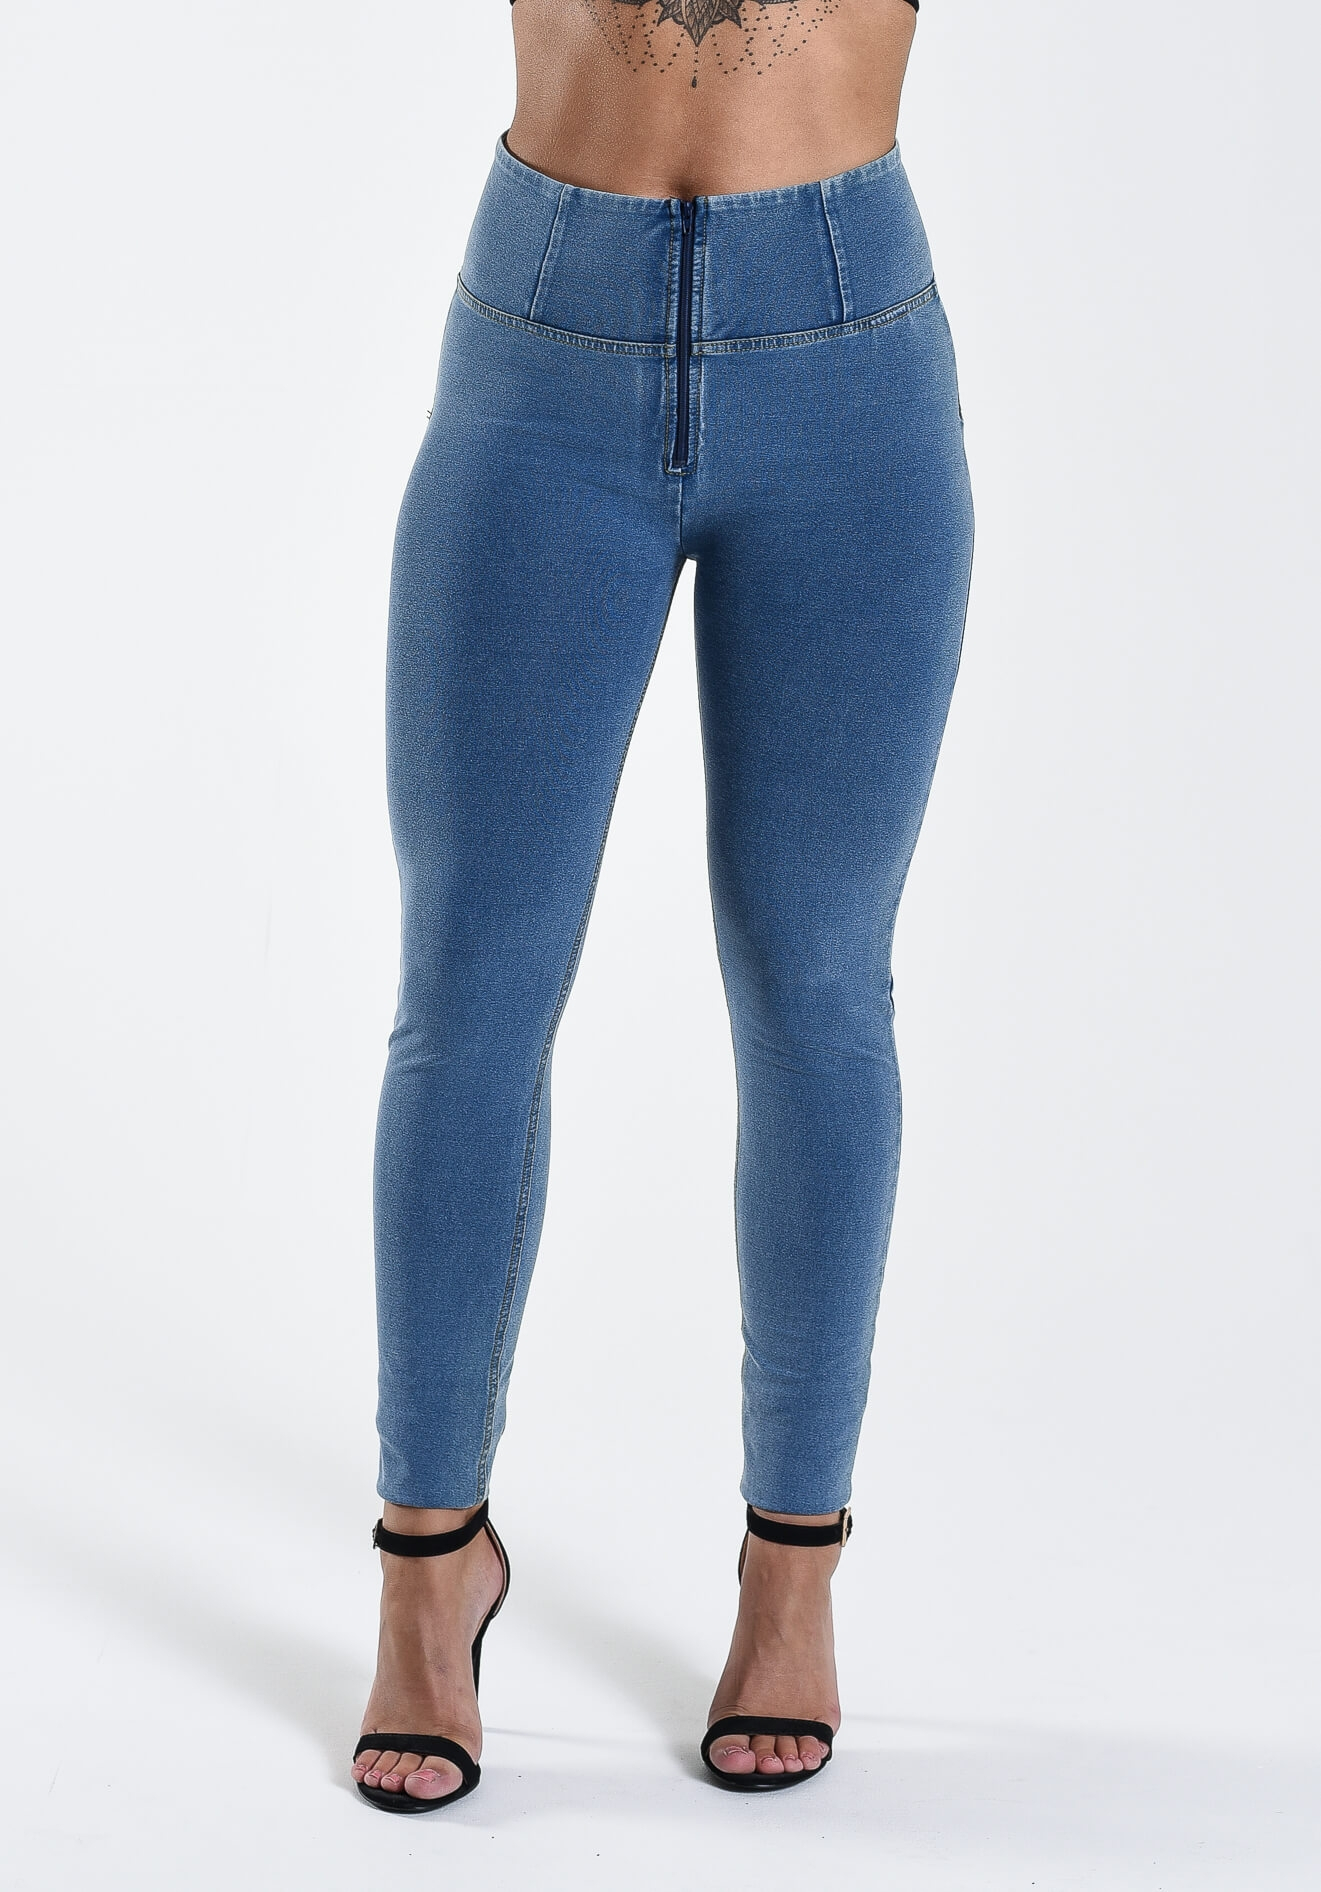 high waisted jeans shaping